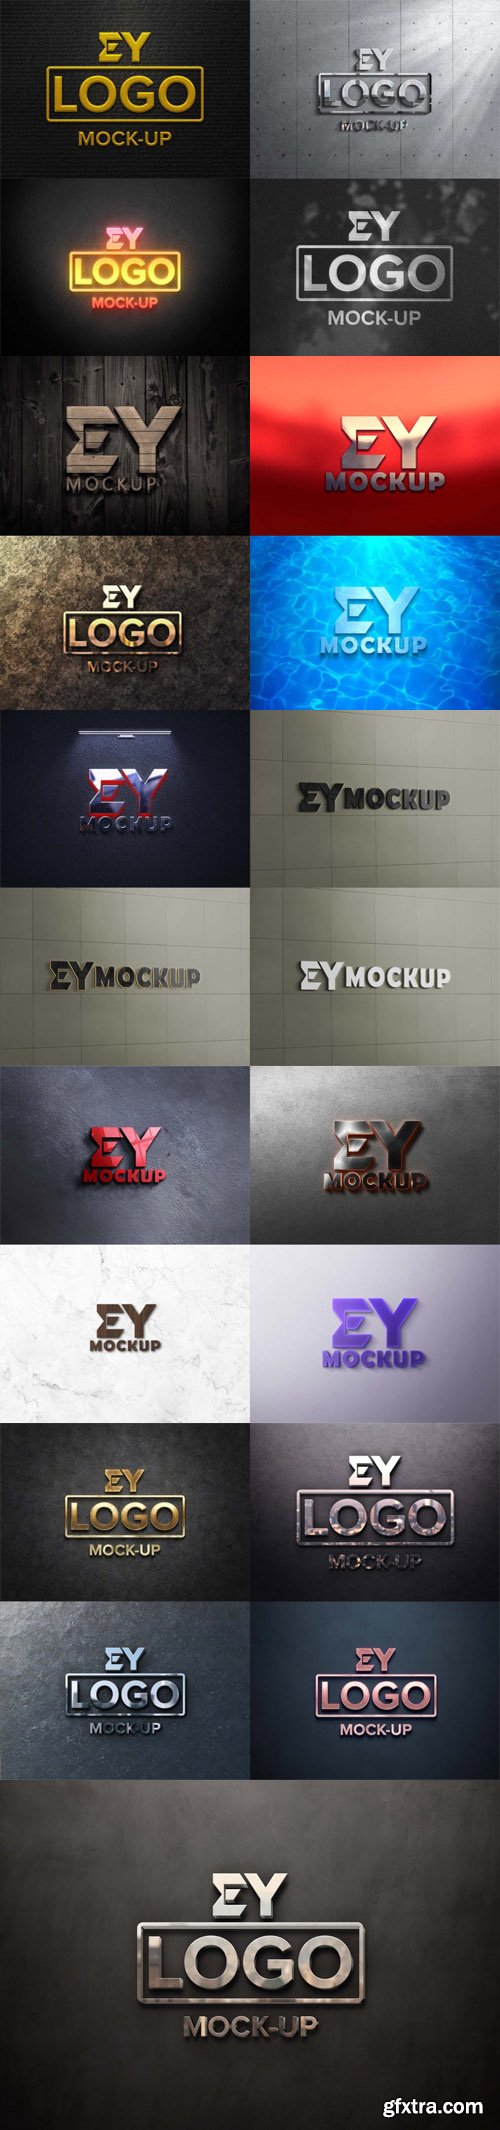 3D Logo & Text Effects Collection - PSD Mockup Templates